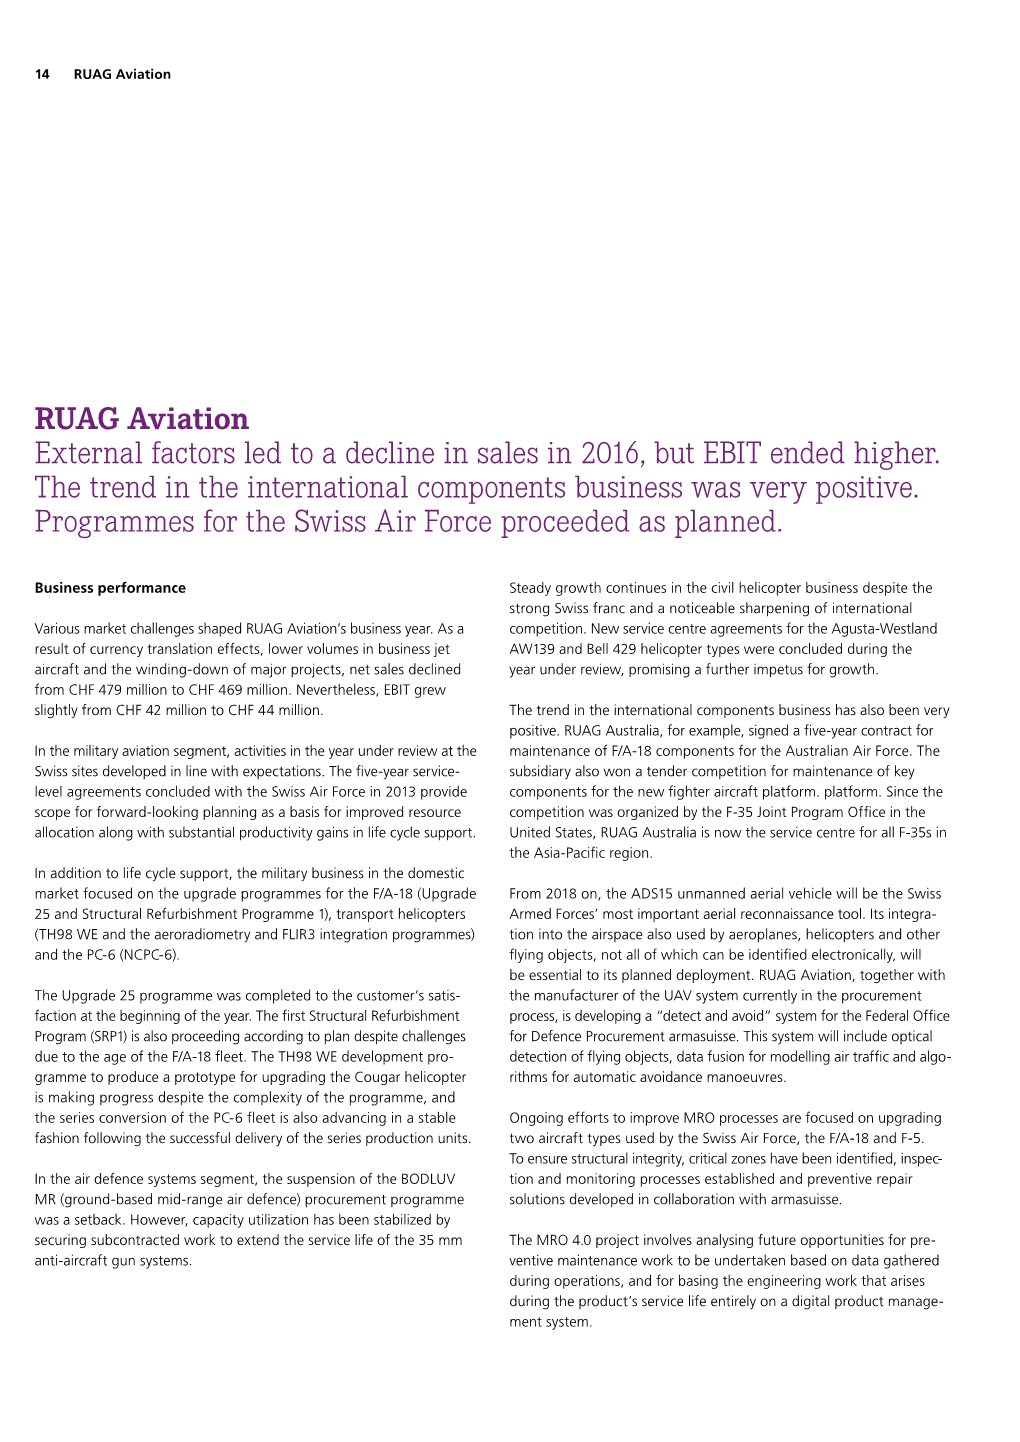 RUAG Aviation External Factors Led to a Decline in Sales in 2016, but EBIT Ended Higher